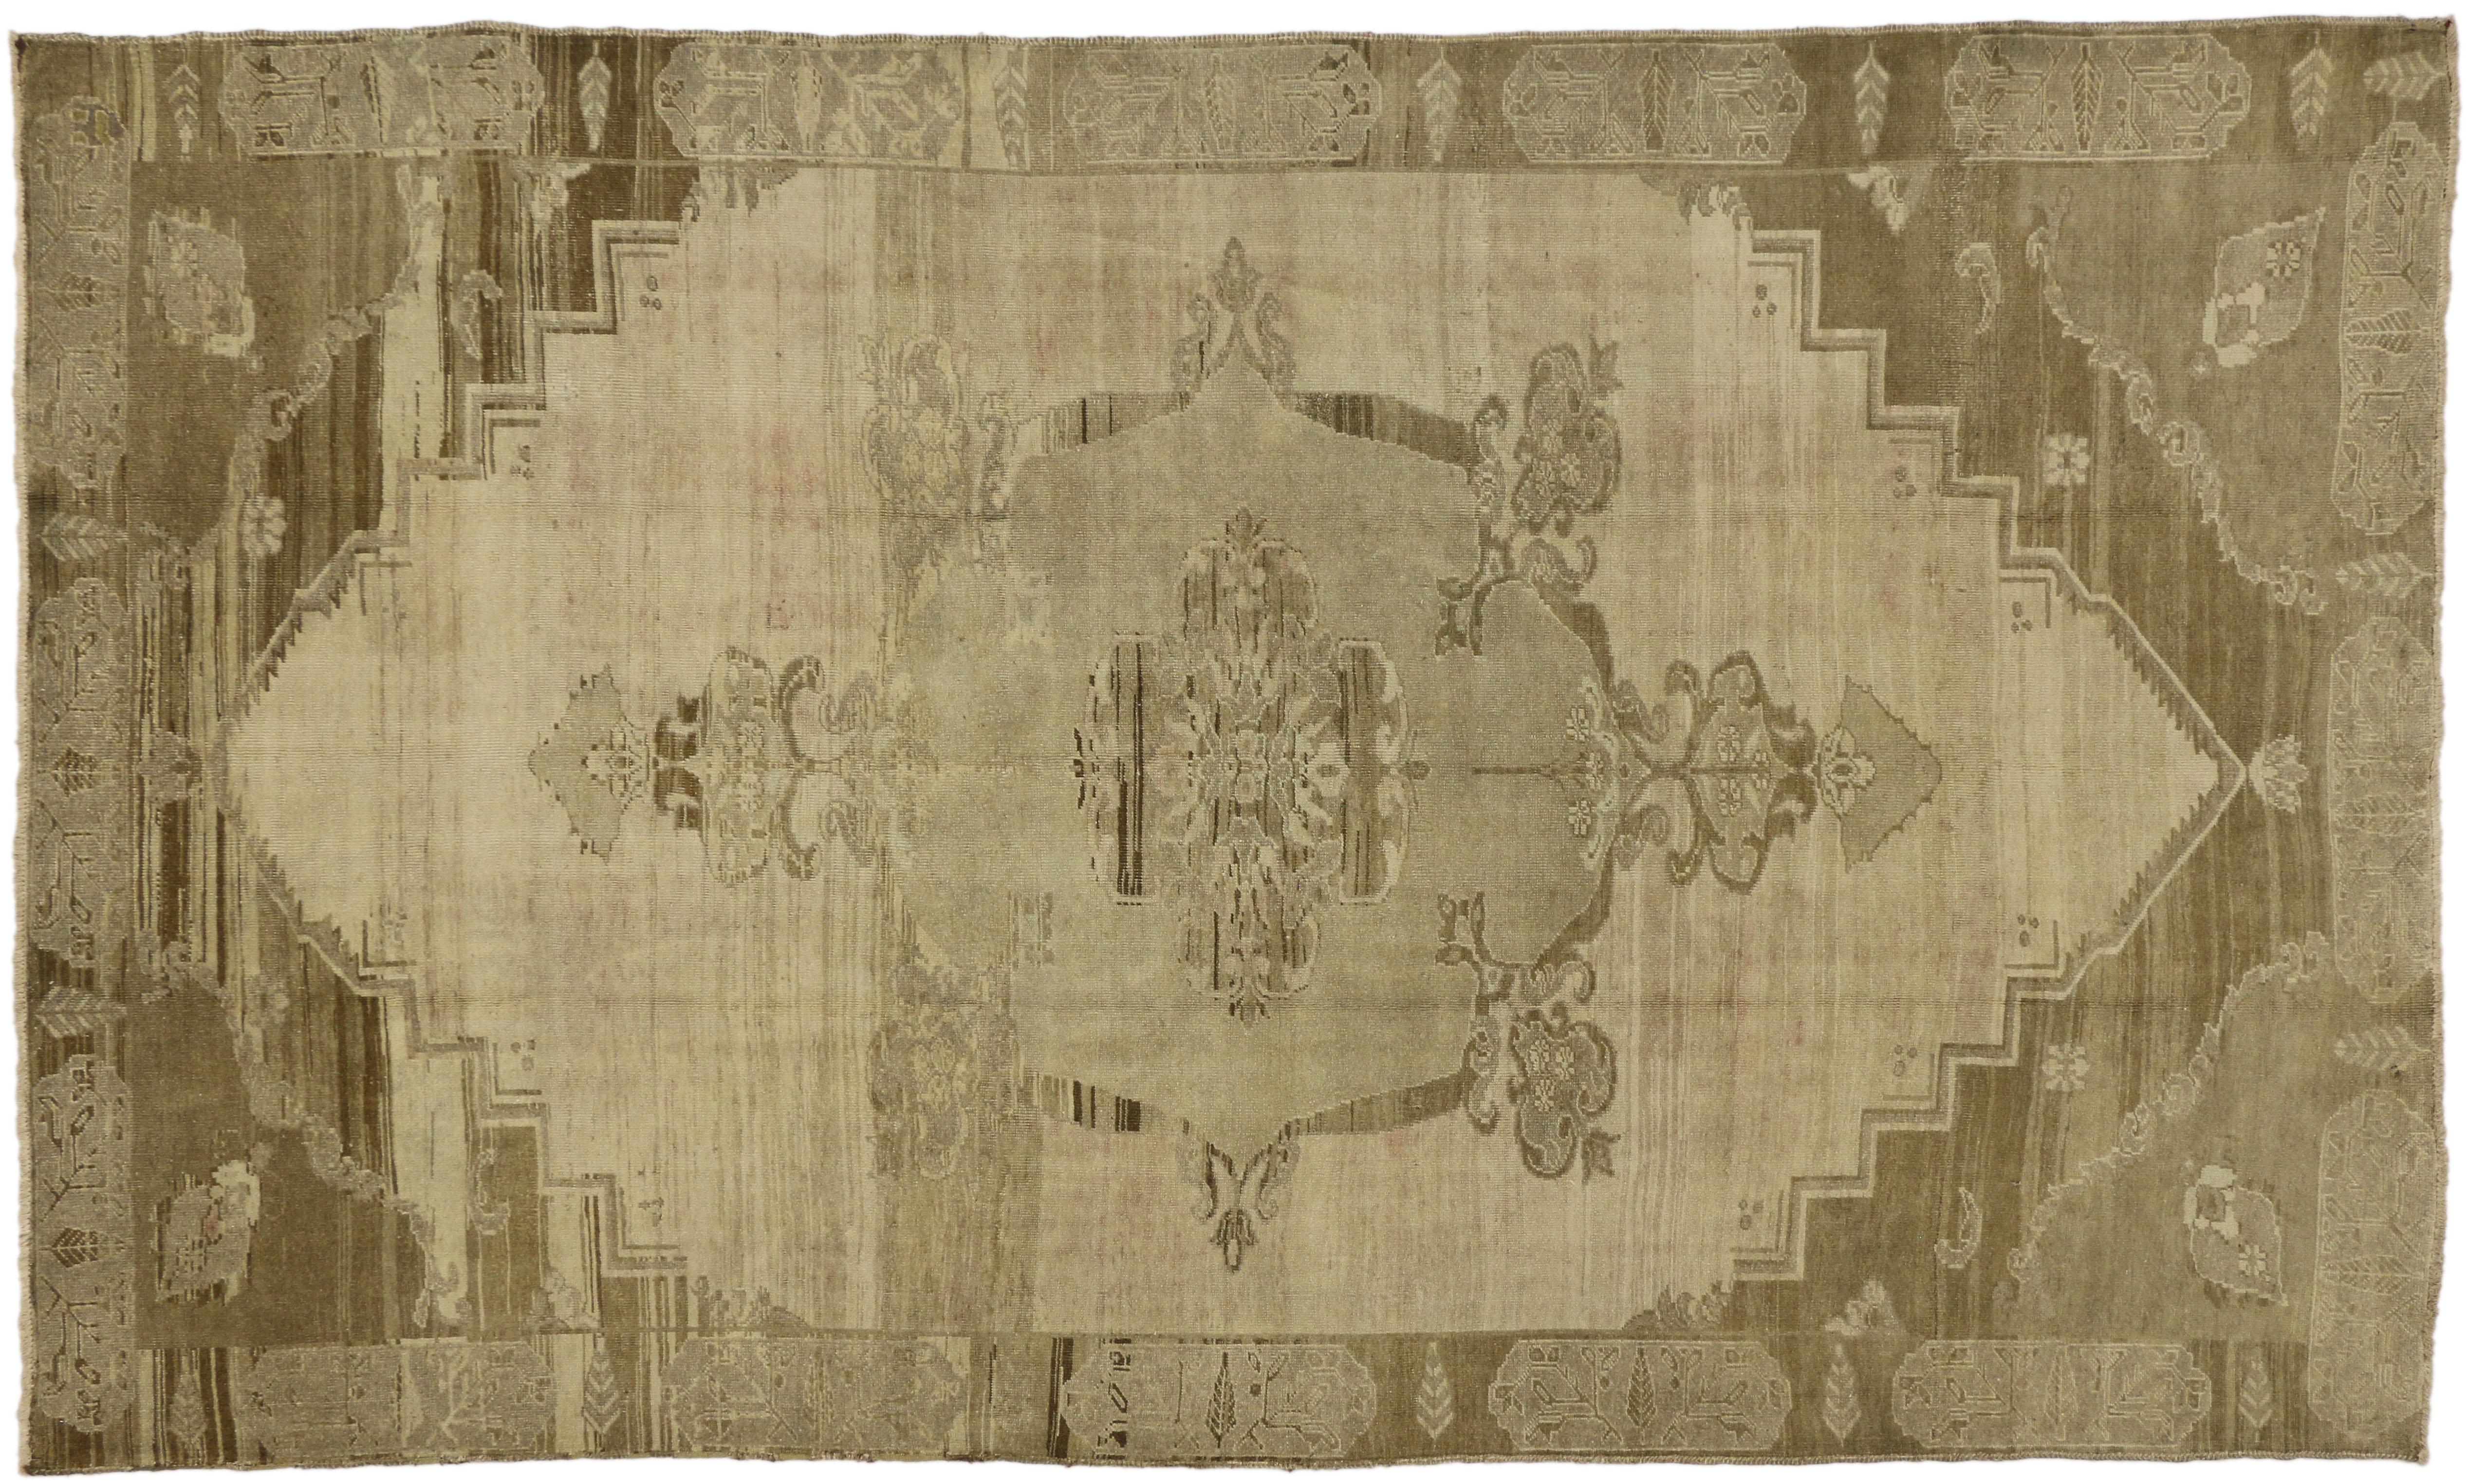 51381 Vintage Turkish Oushak Rug with Warm, Neutral Colors and Modern Style. This hand-knotted wool vintage Turkish Oushak rug bears a remarkable air of chic sophistication with its muted colors and modern style. A finely fashioned elegant medallion